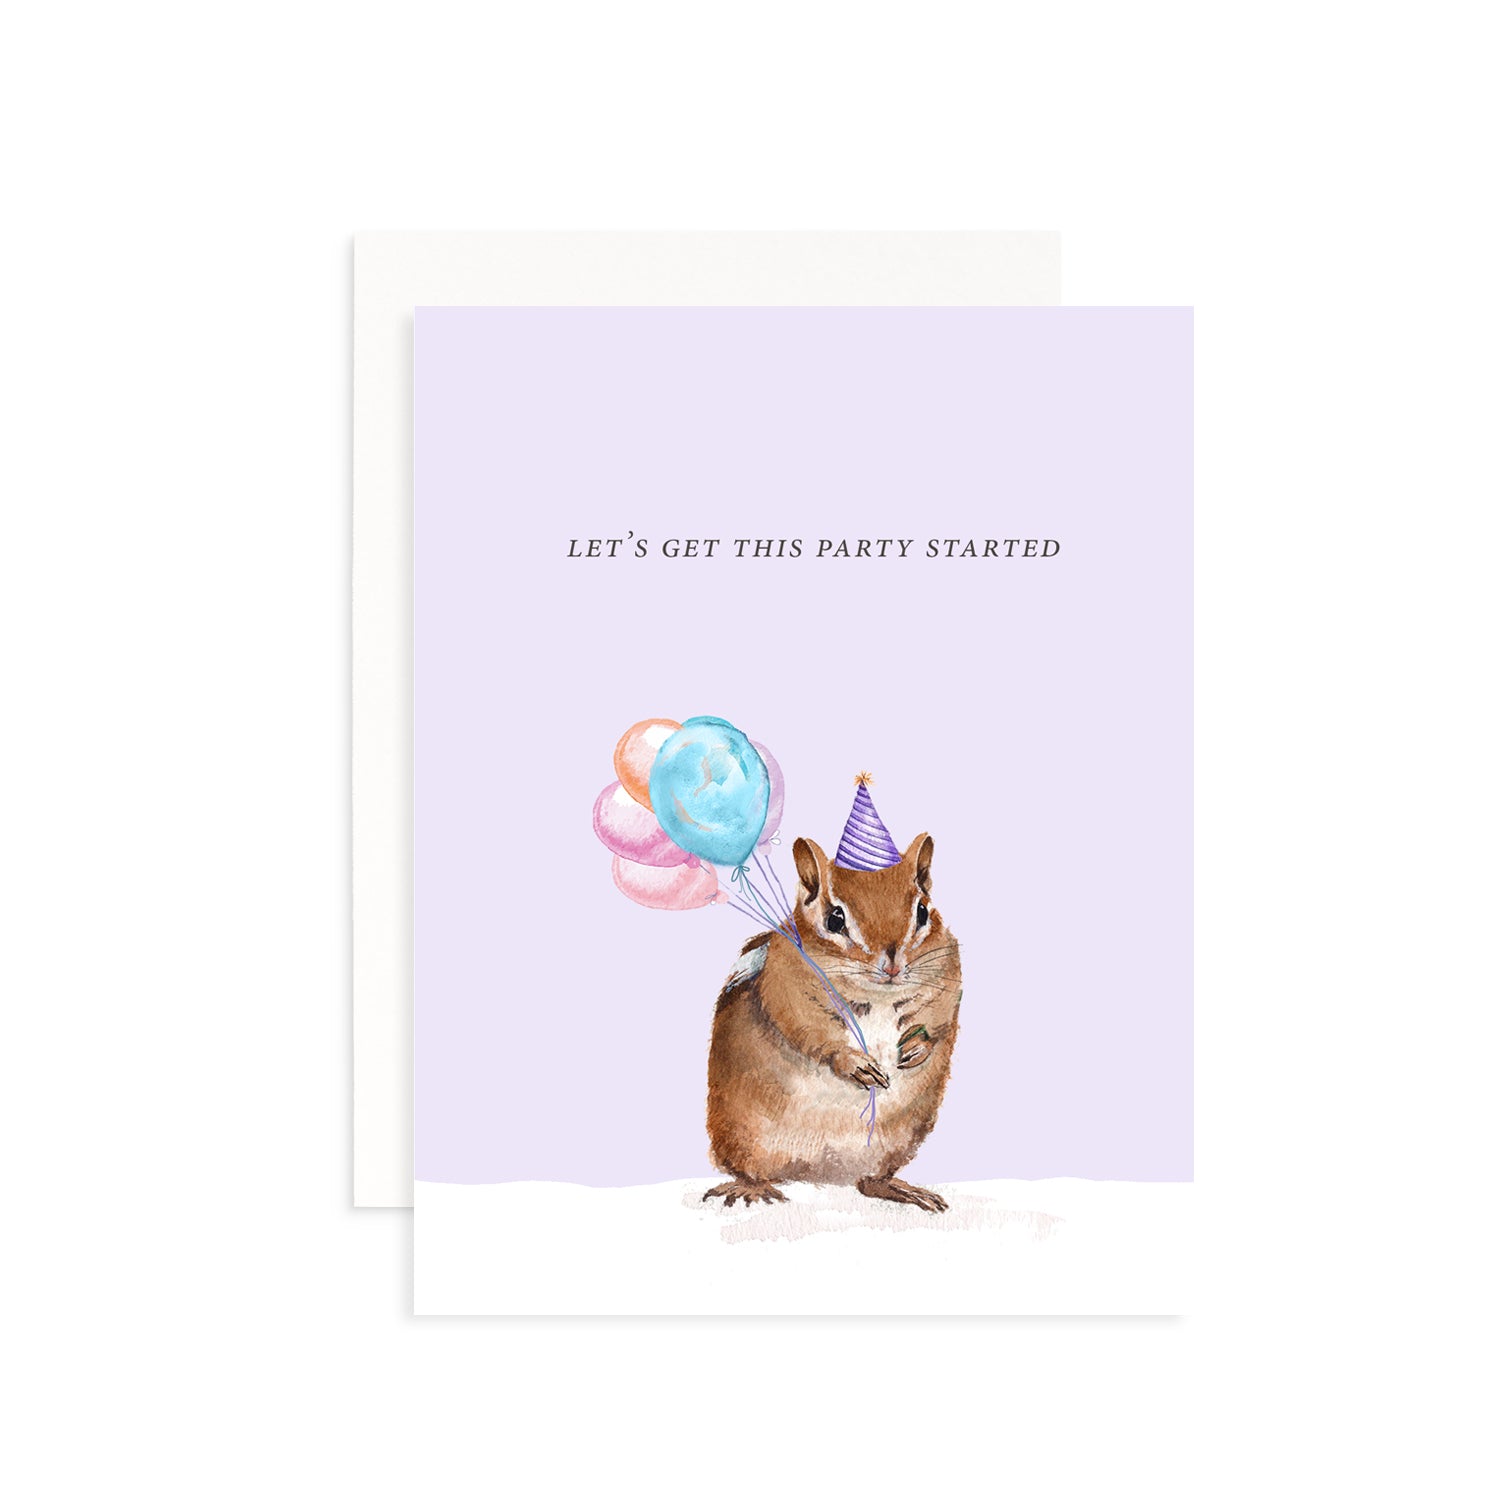 Let's Get This Party Started Greeting Card